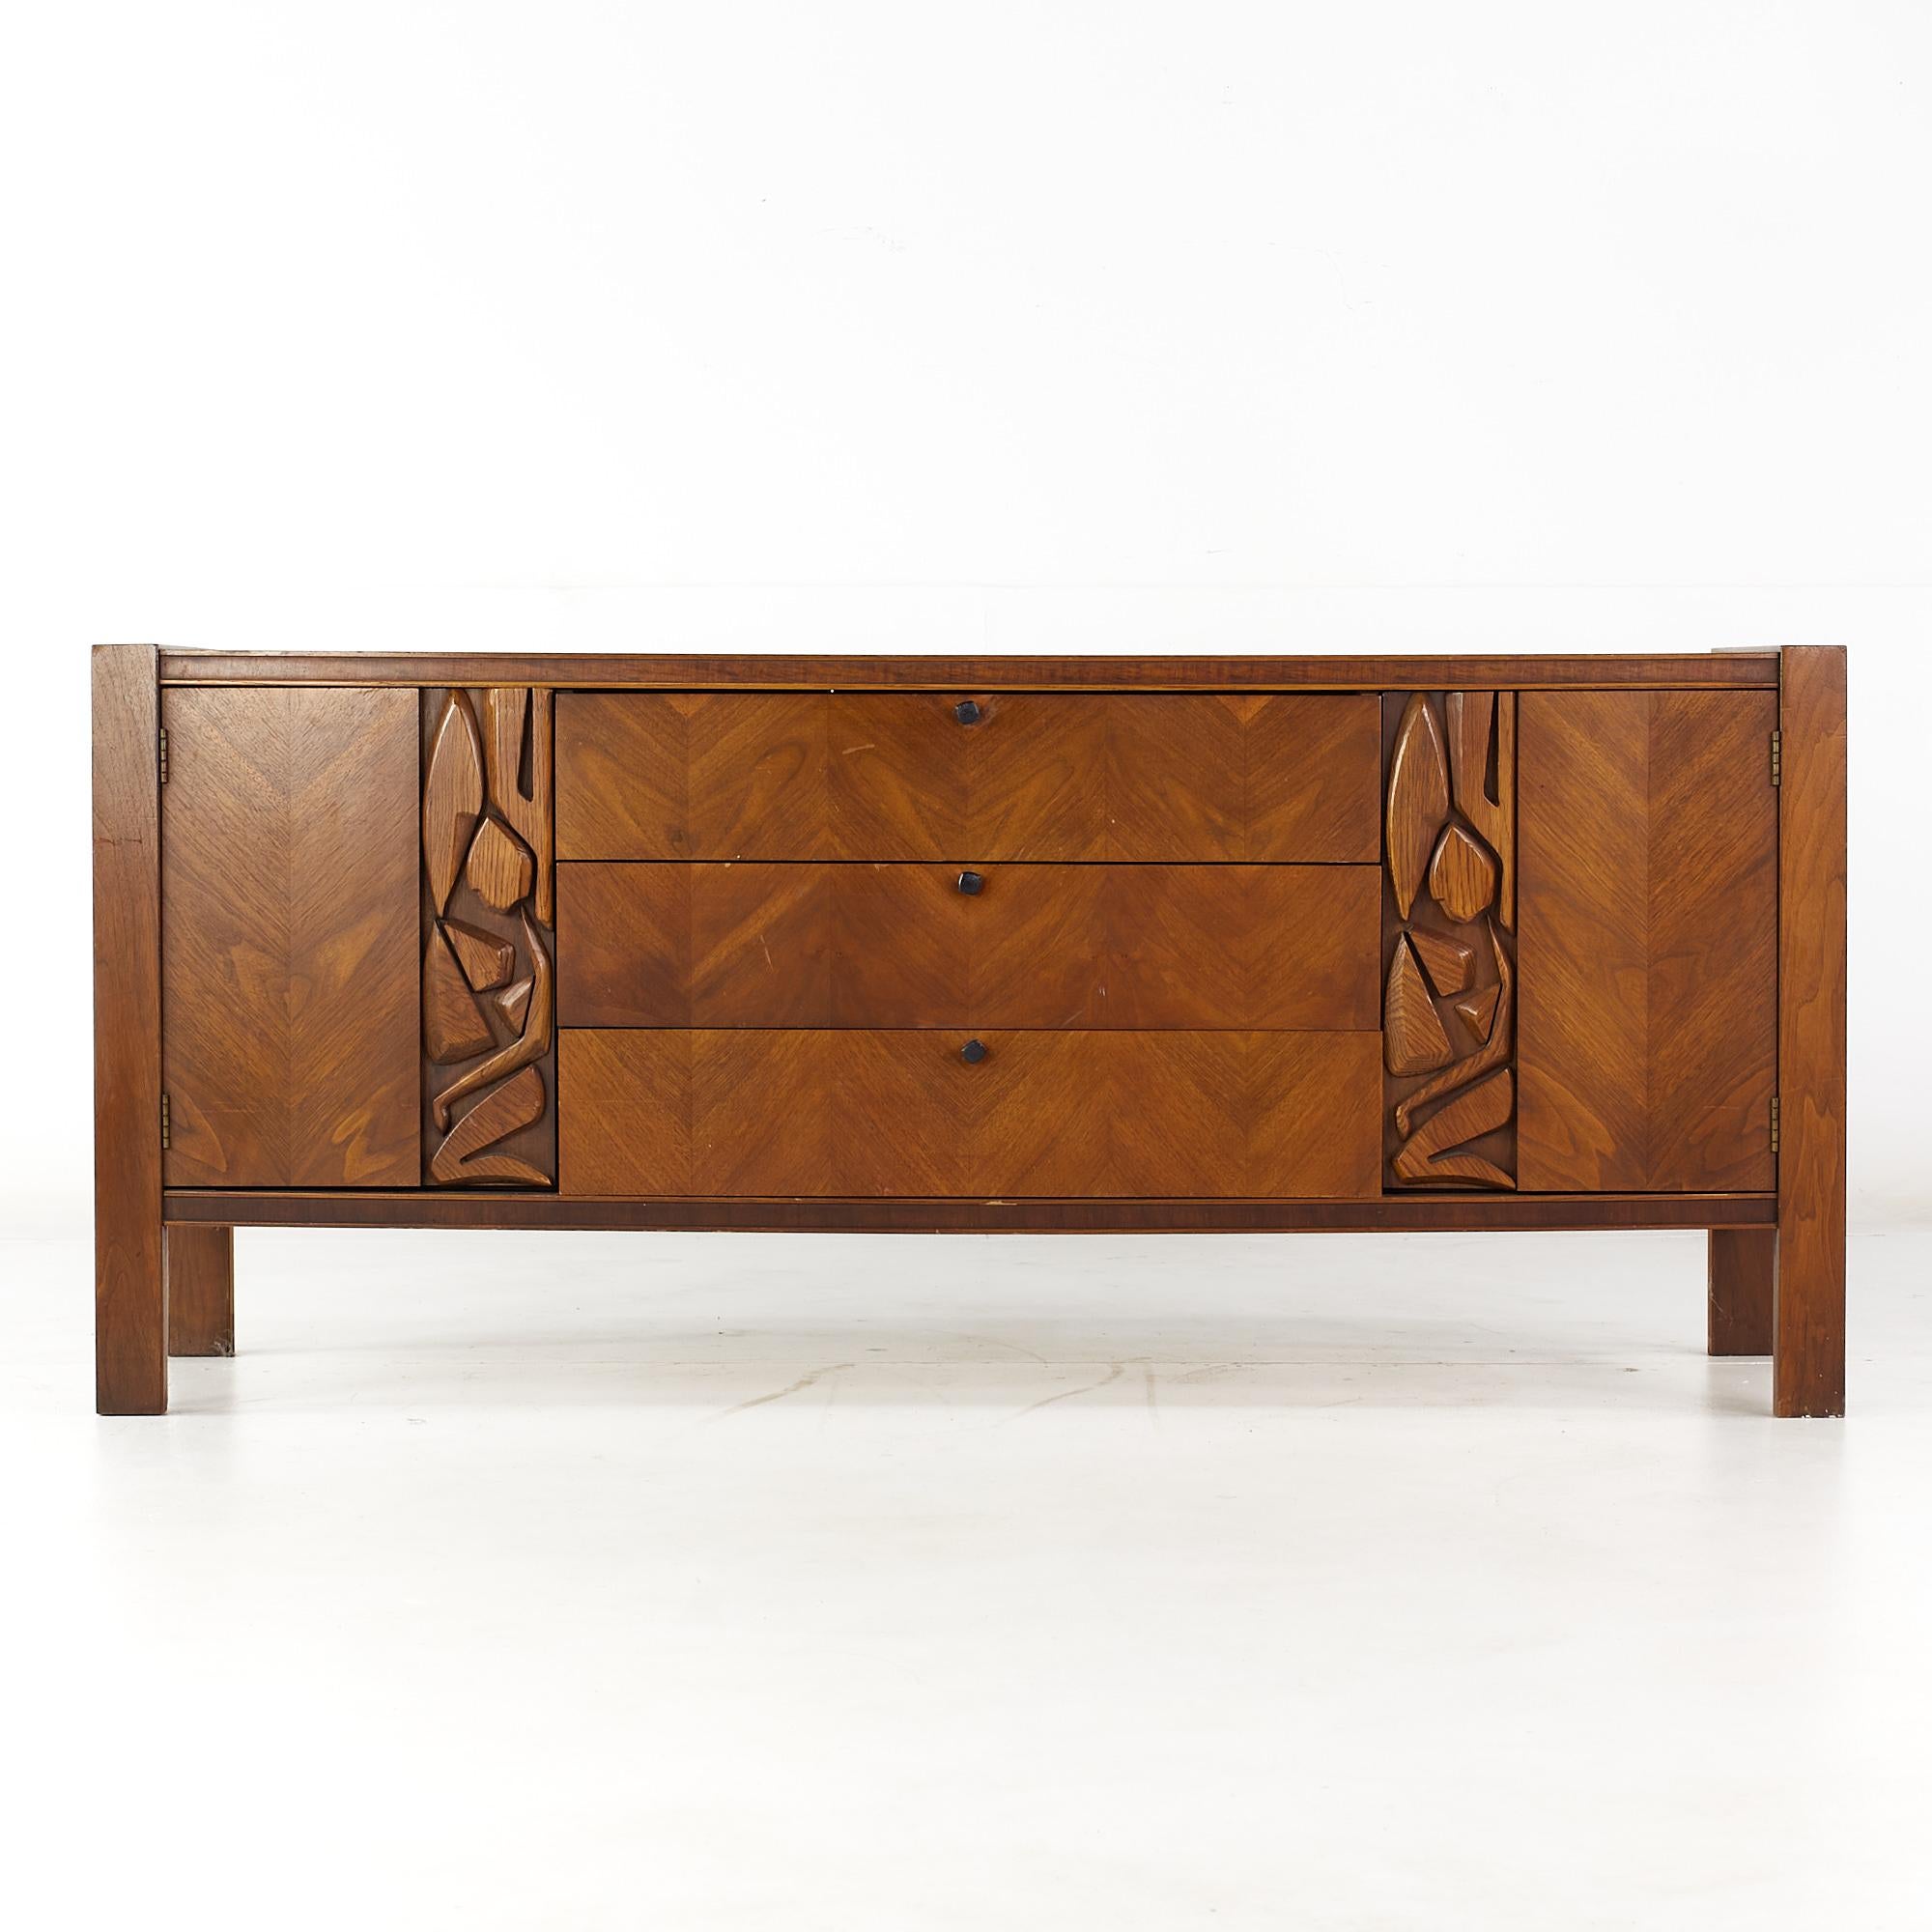 United Tiki Brutalist Mid Century walnut 9 drawer lowboy dresser

This lowboy measures: 74 wide x 20.25 deep x 30.75 inches high

All pieces of furniture can be had in what we call restored vintage condition. That means the piece is restored